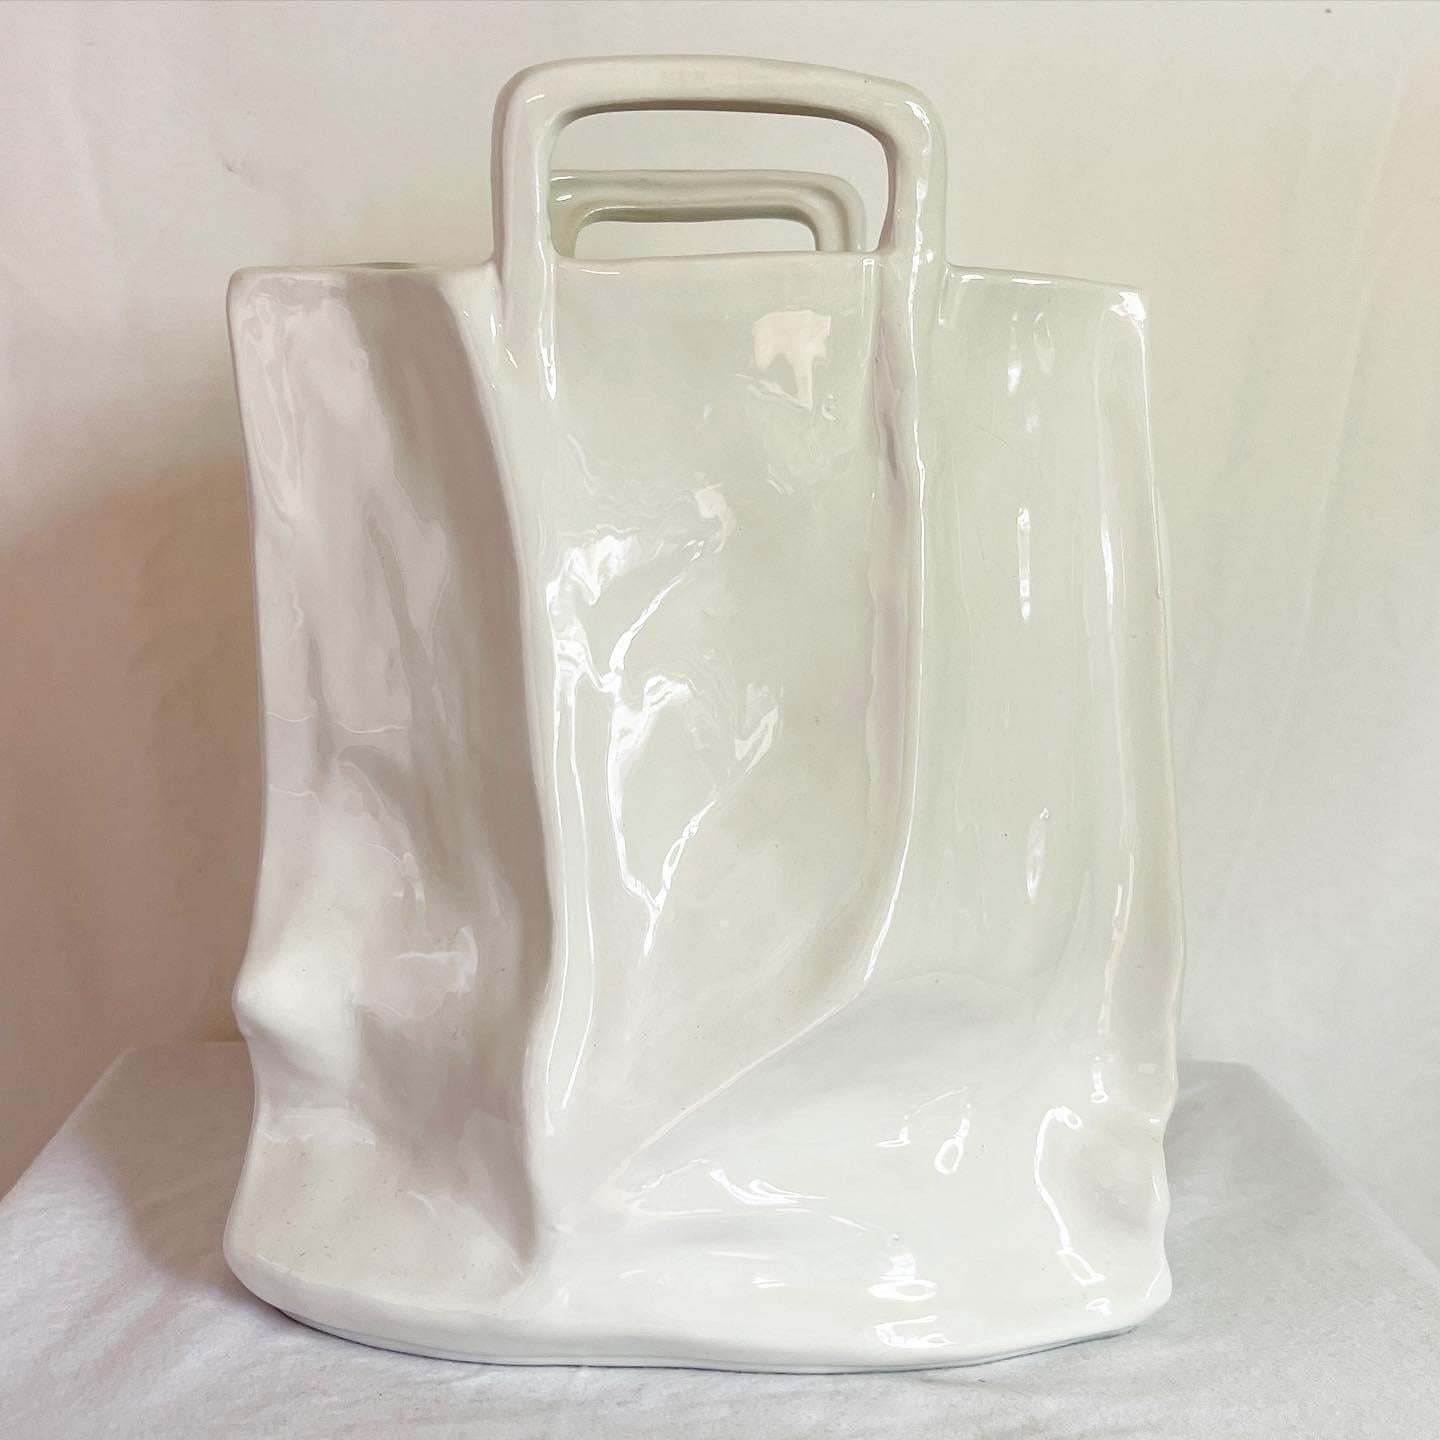 Amazing vintage postmodern ceramic sculpted vase. Subject is a glossy white bag handles.
 